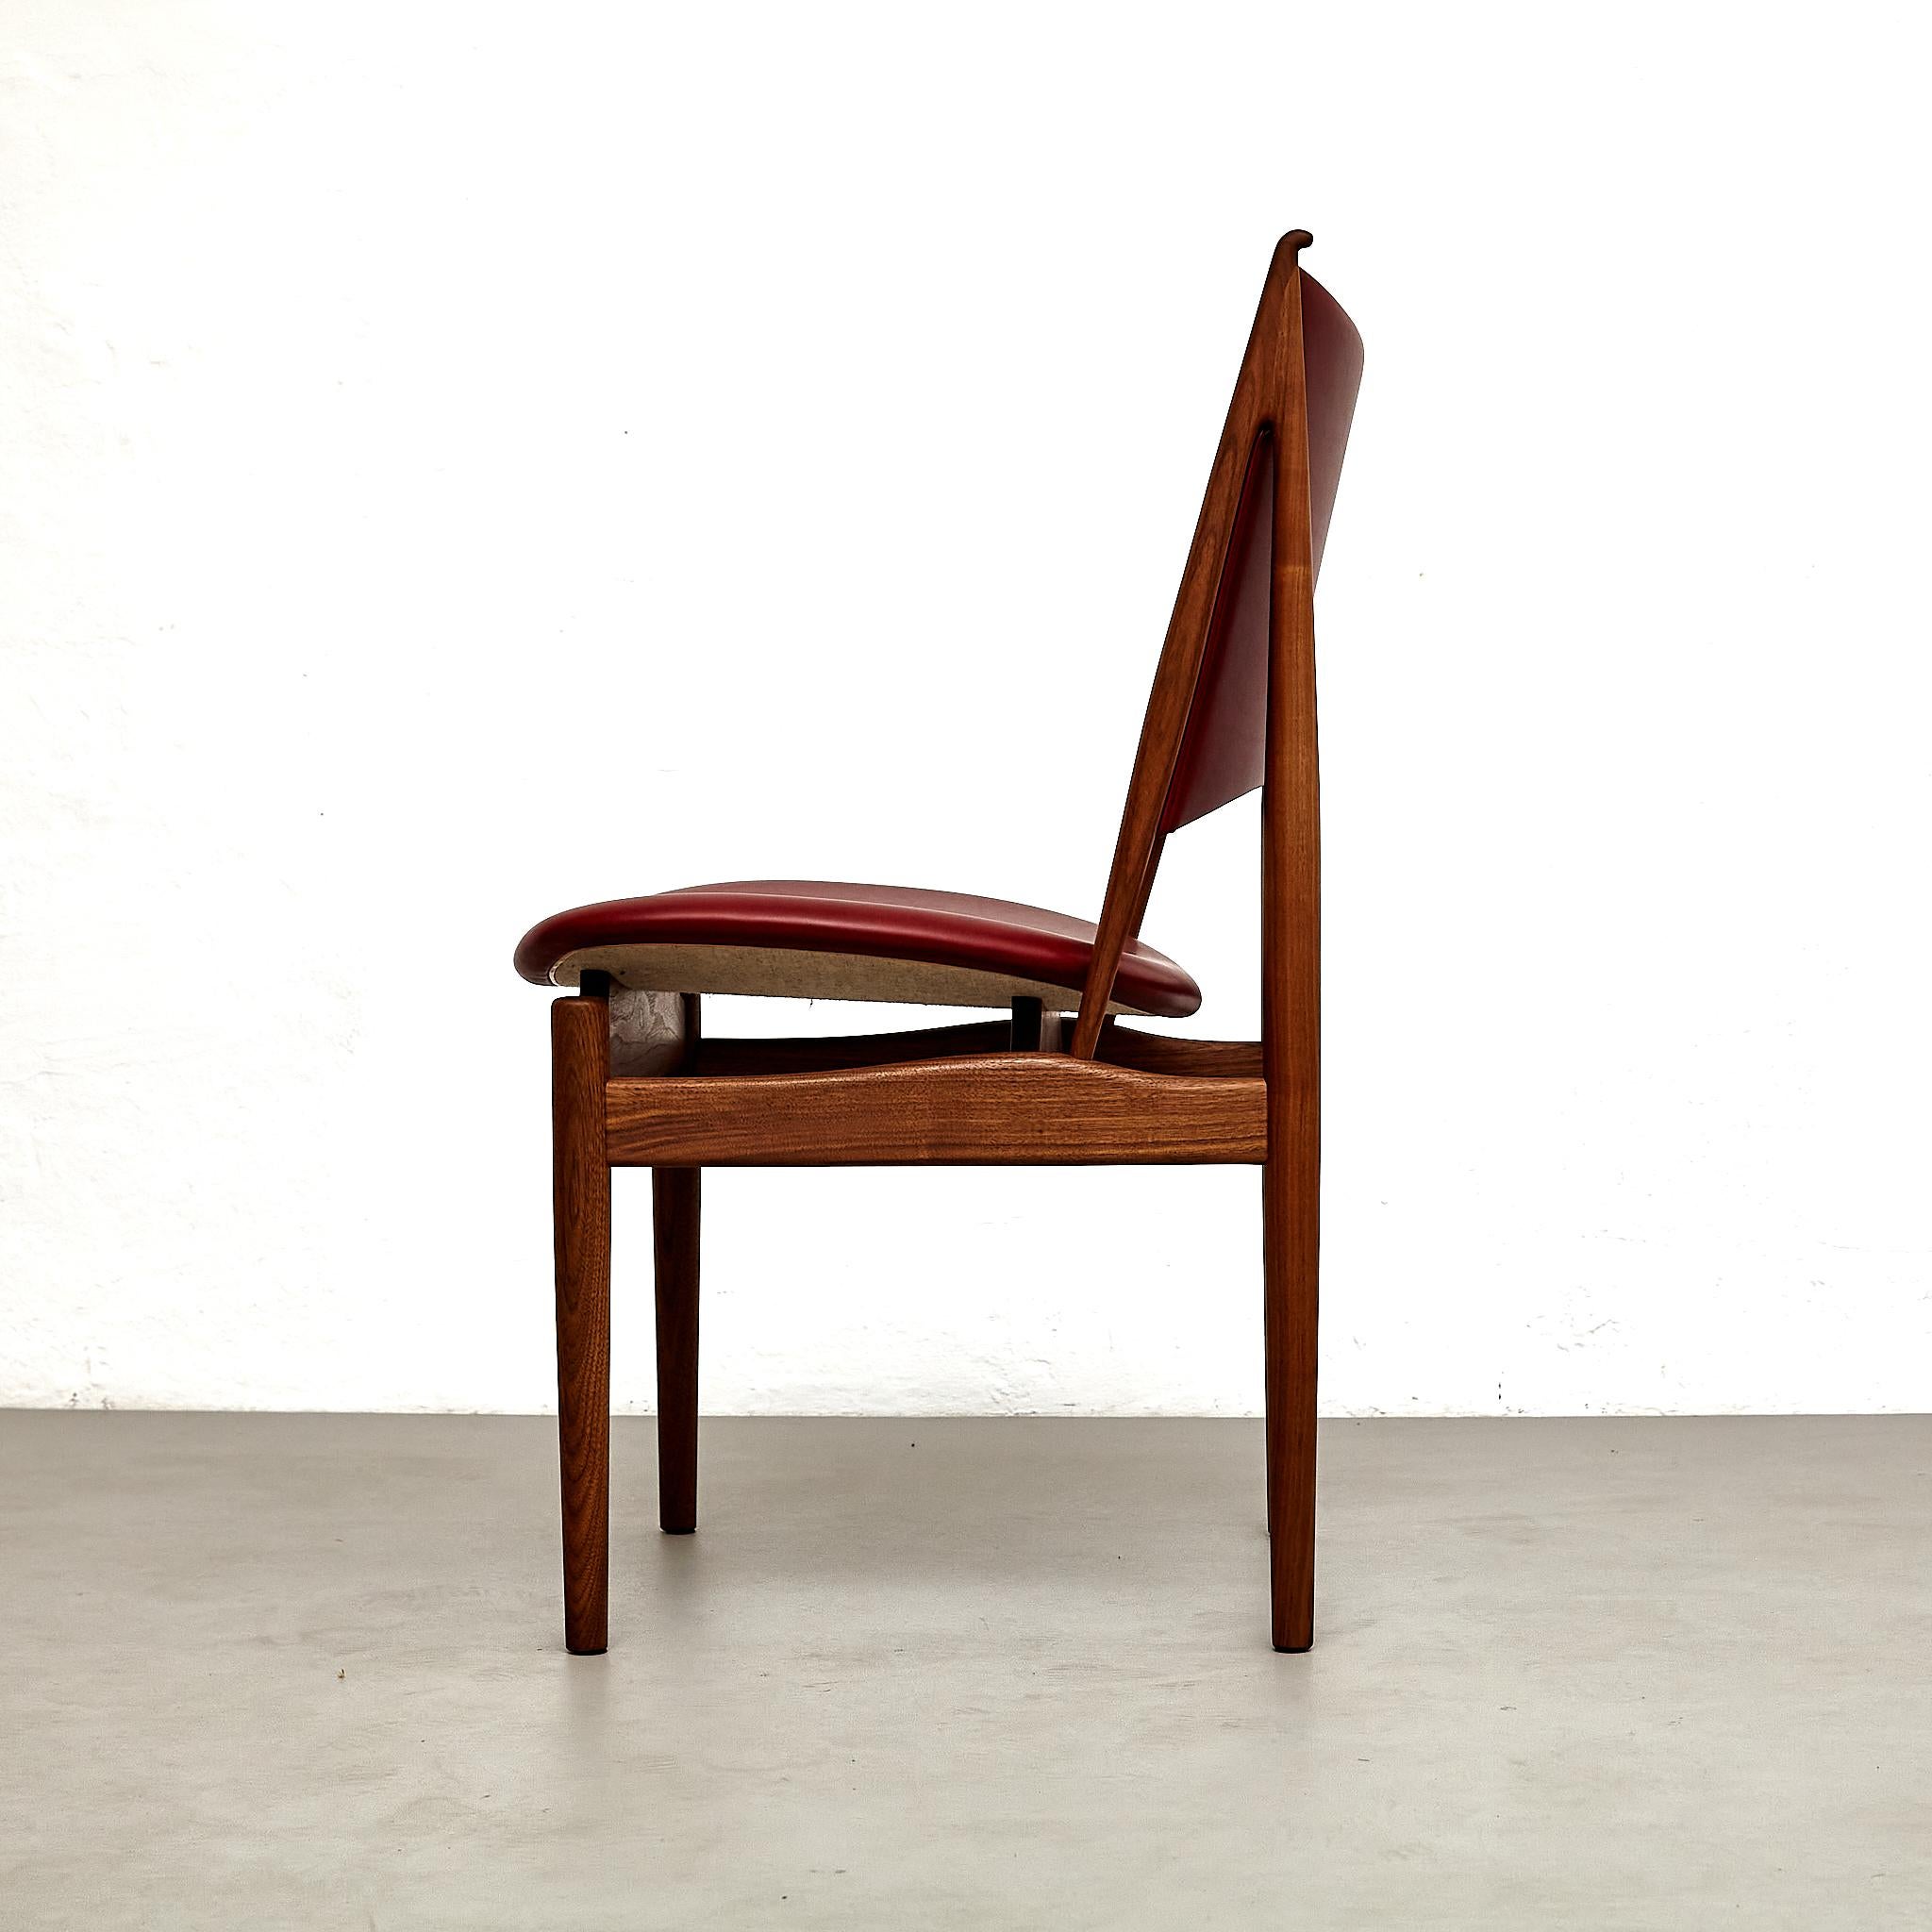 Contemporary Finn Juhl Egyptian Chair in Walnut Wood and Dark Red Leather For Sale